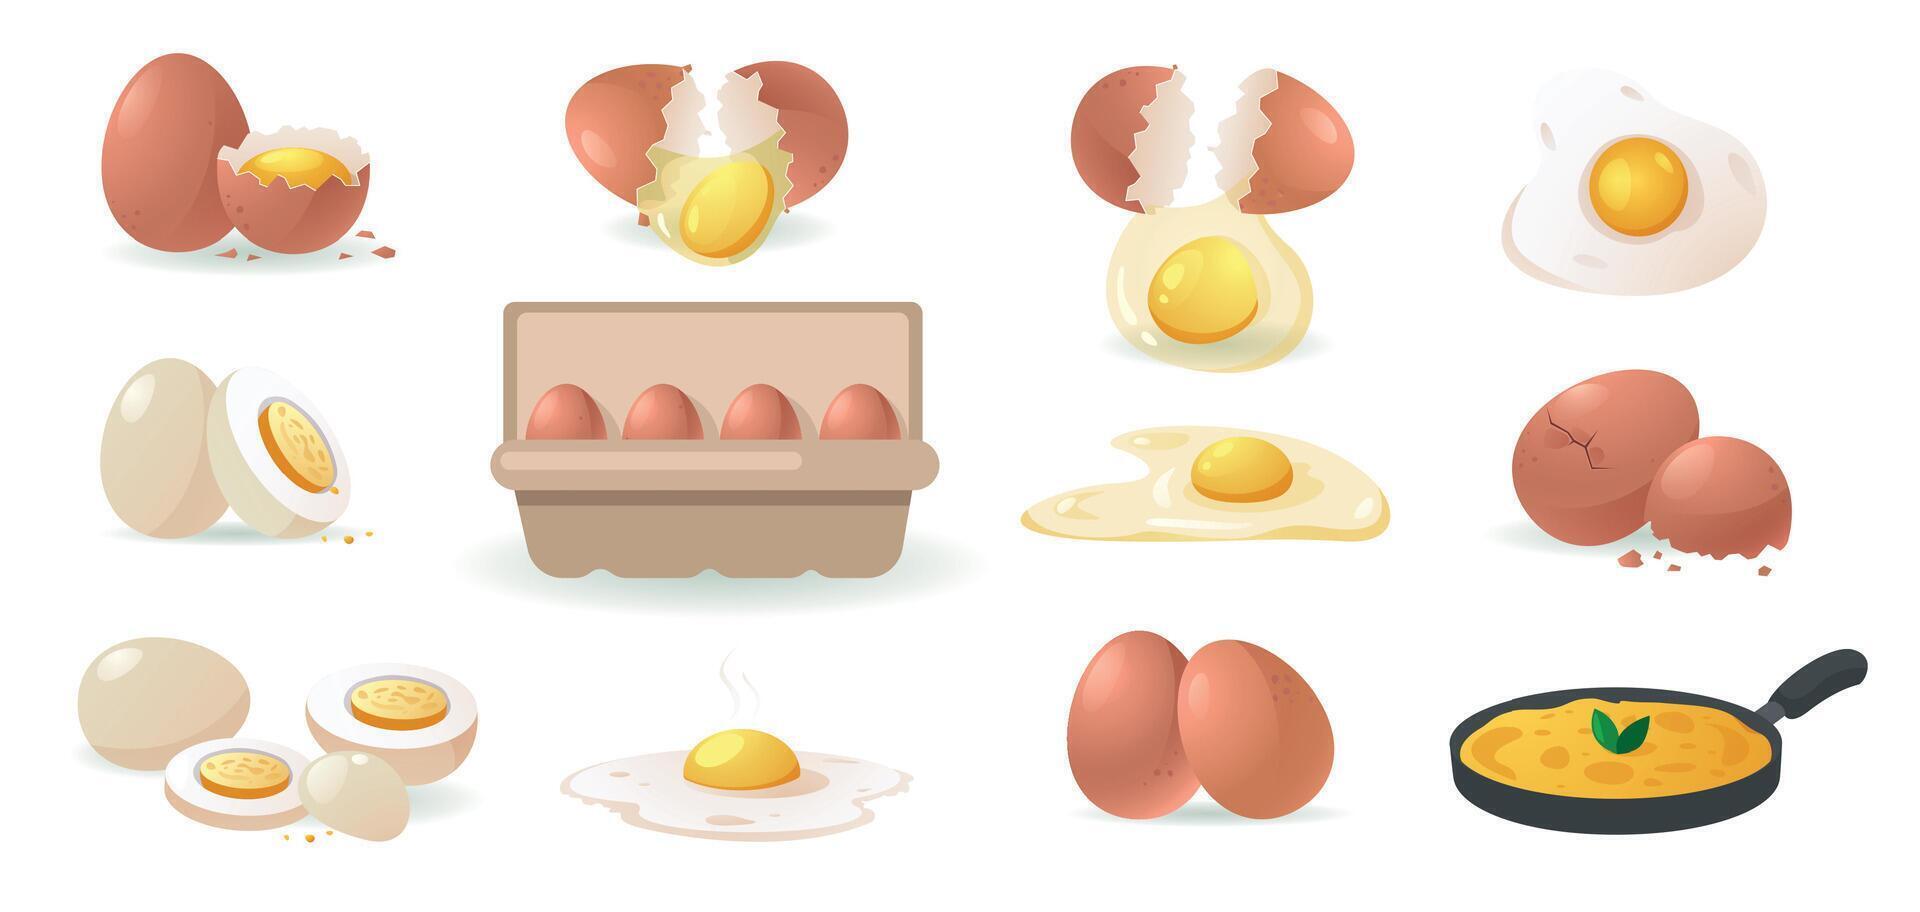 Cartoon eggs set. Broken egg raw yolk eggshell protein, fresh farm cooking natural ingredients in container, healthy organic food concept. Vector isolated set